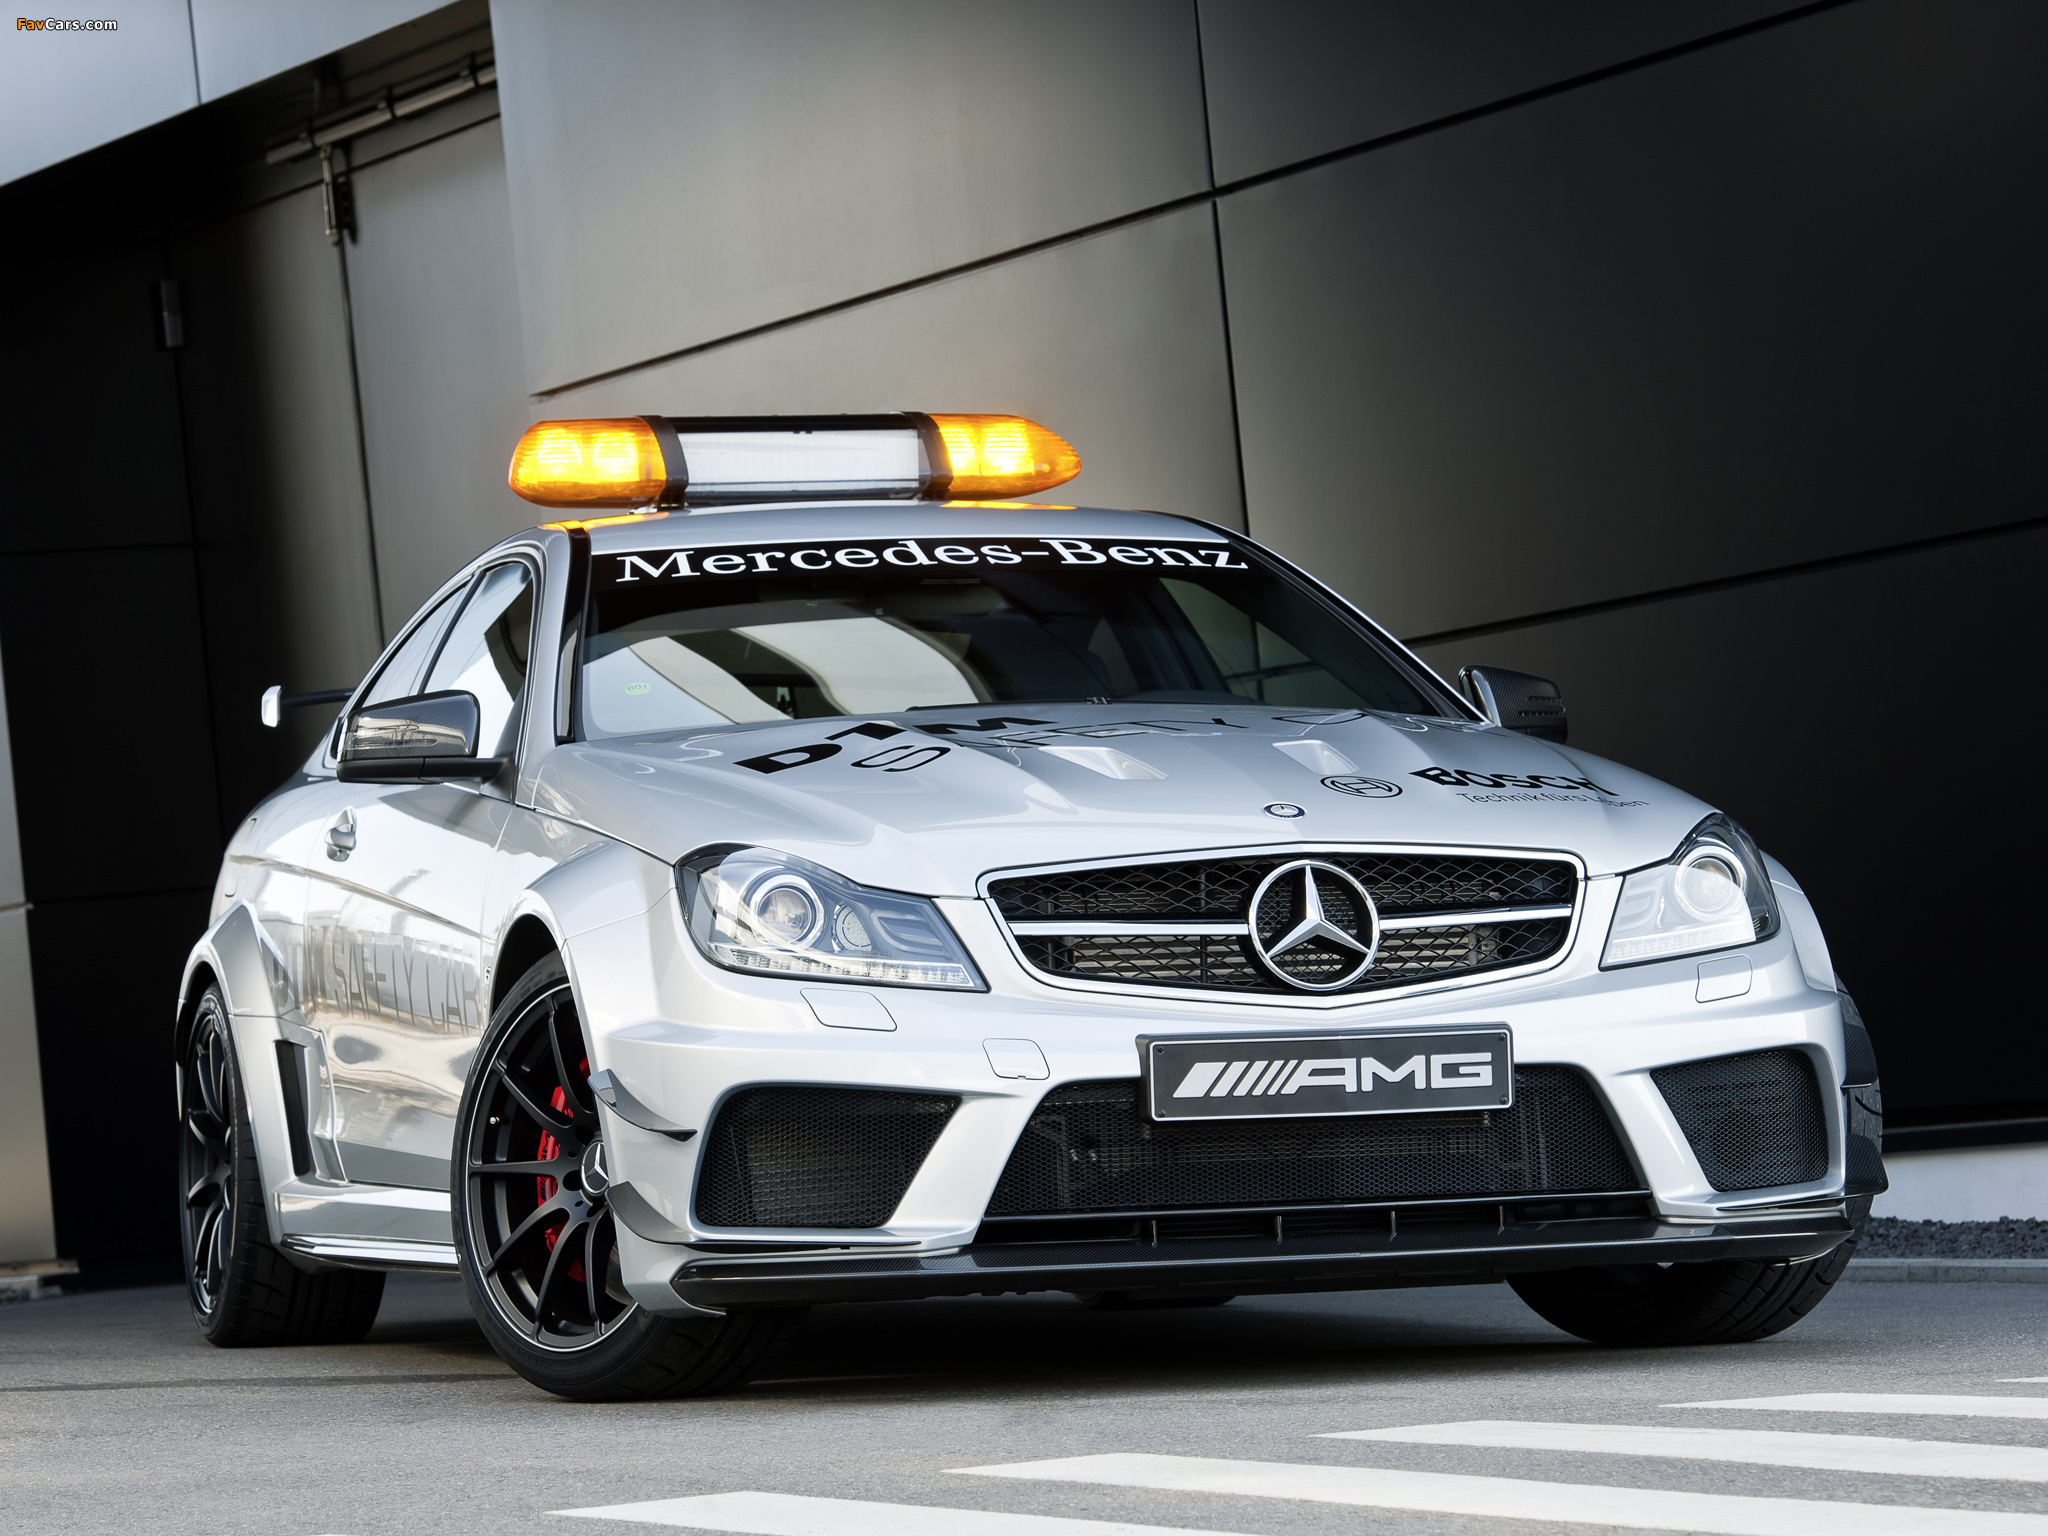 Mercedes-Benz C 63 AMG Black Series Coupe DTM Safety Car (C204) 2012 wallpapers (2048 x 1536)